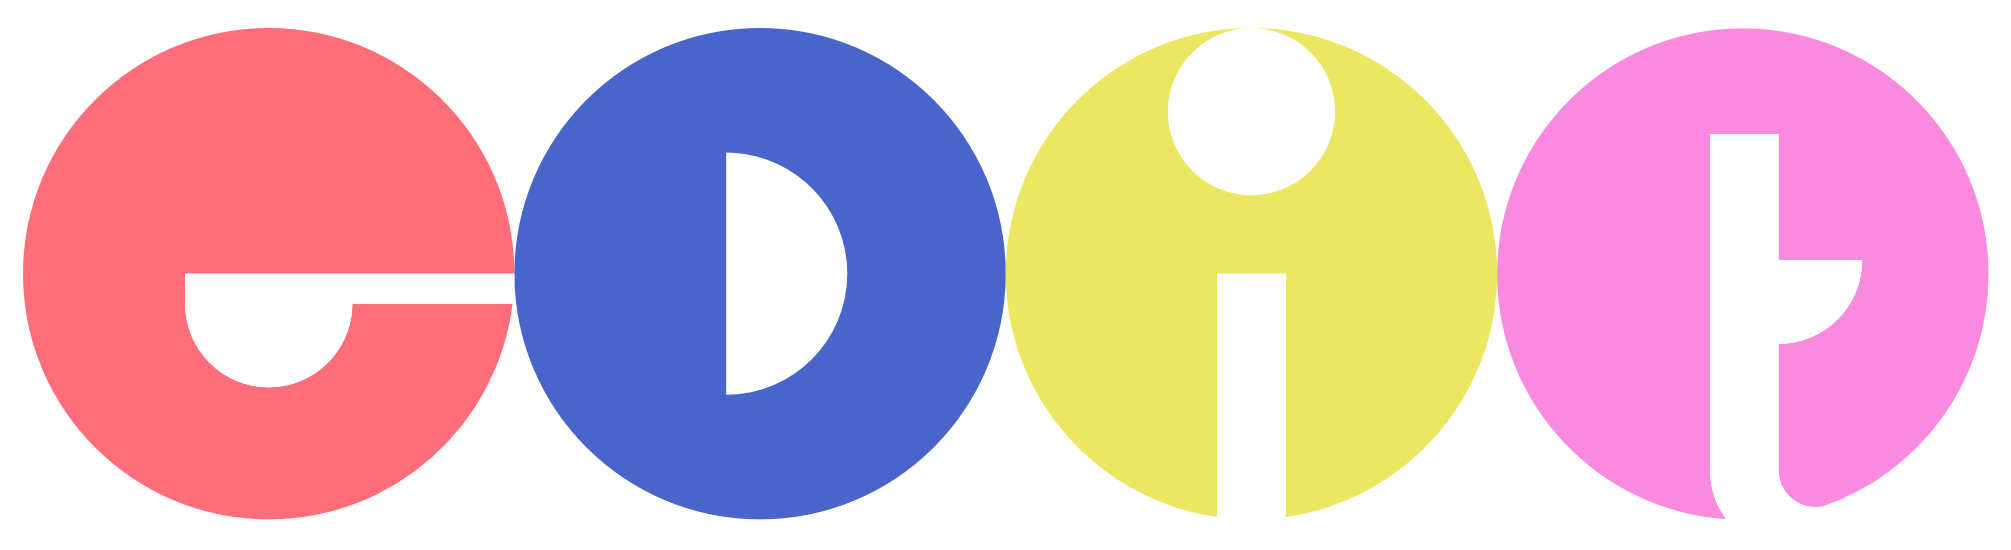 Four colorful circles with shapes inside that form the word edit.